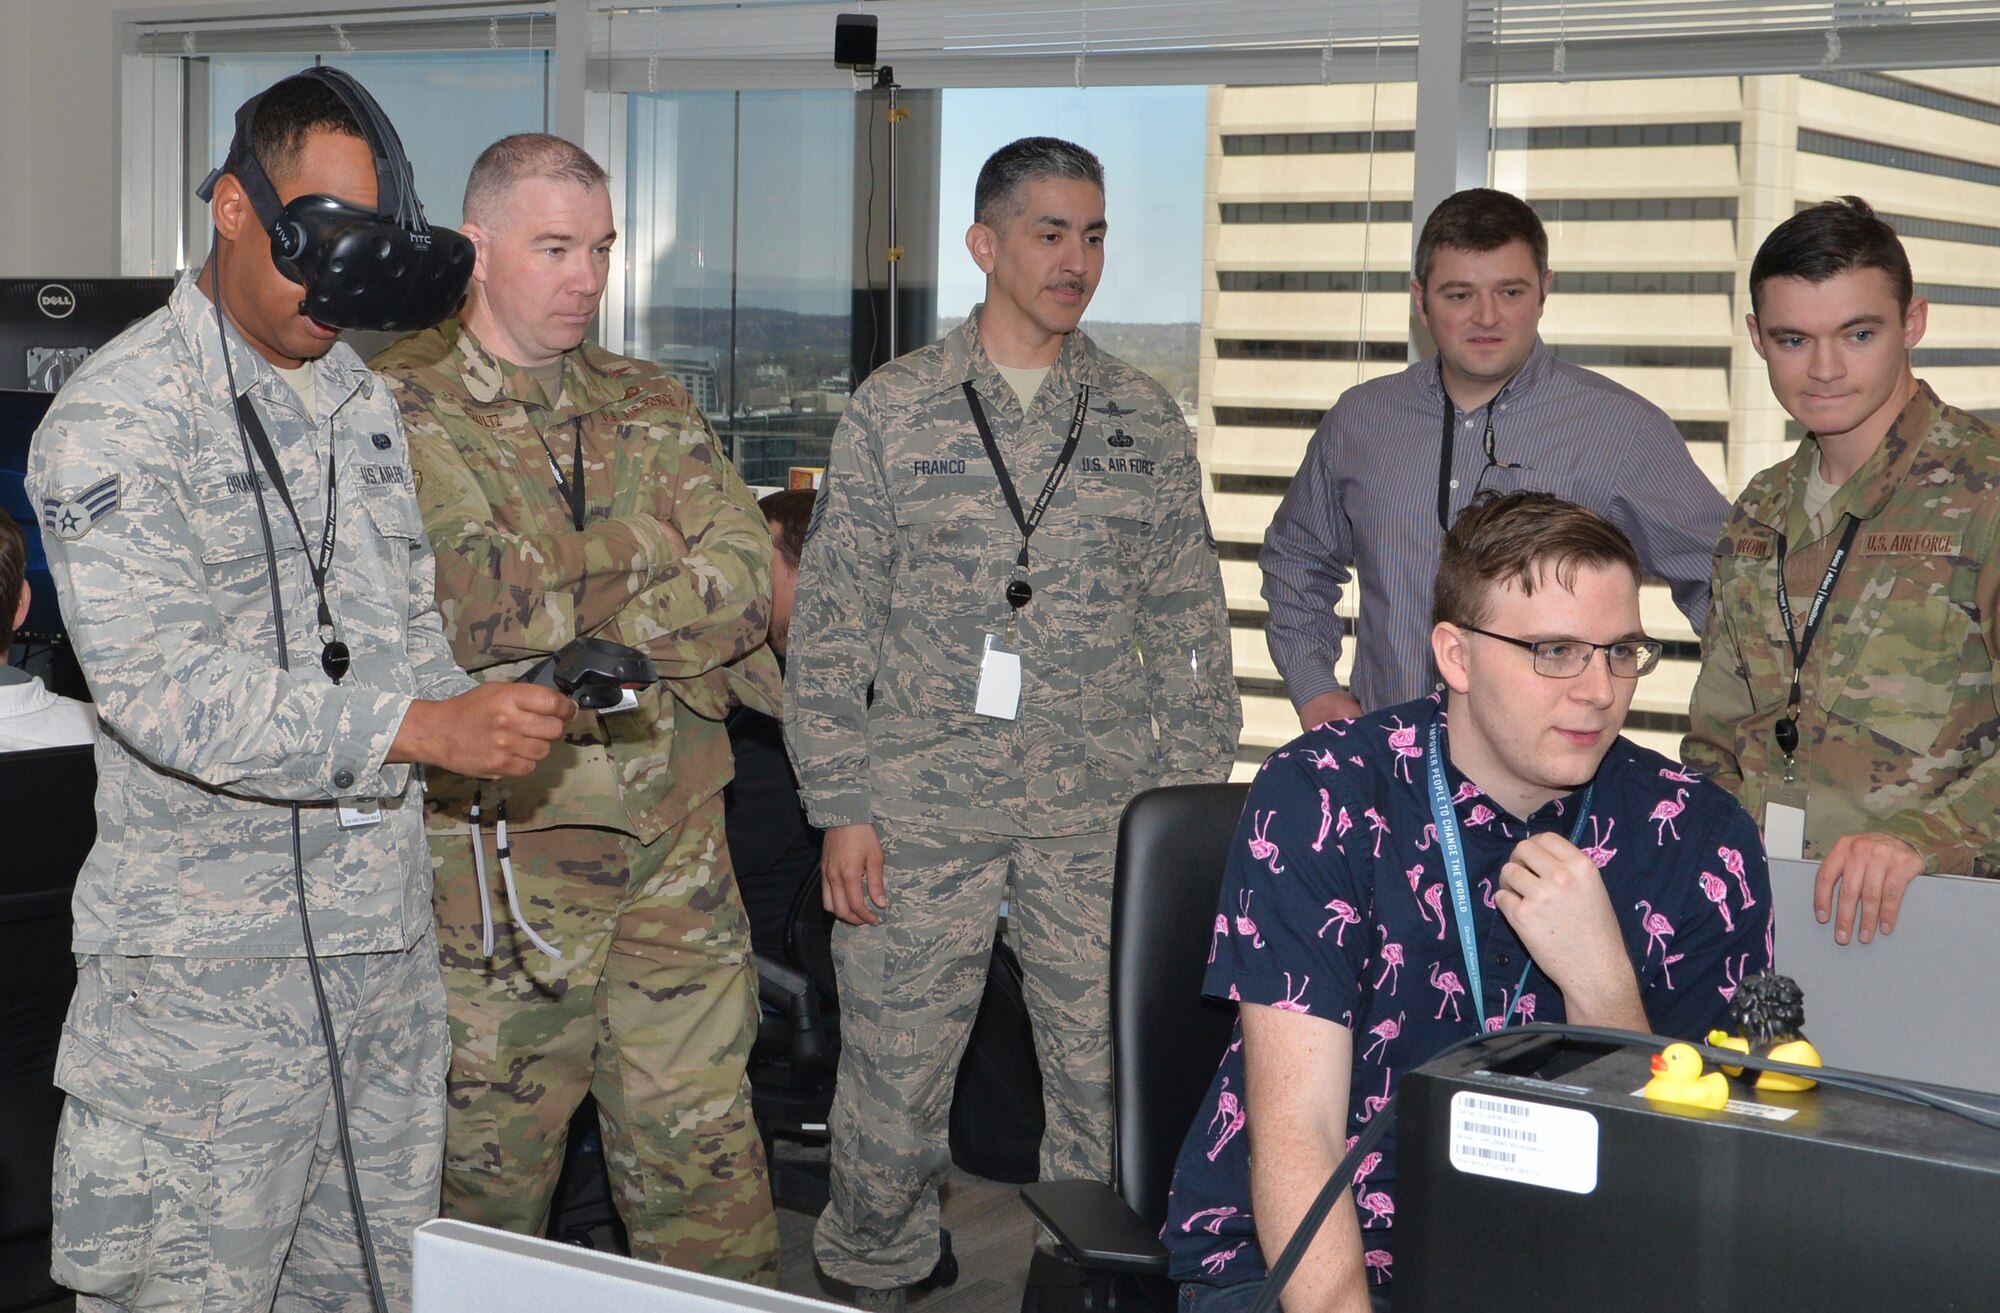 Chief Master Sgt. Peter Franco, 55th Communication Group, superintendent and members of the 55th CG test virtual reality features April 19, 2019 at Booz Allen Hamilton in Omaha, Nebraska. was born into a band of mission Native Americans, serves in the highest enlisted Air Force rank of chief master sergeant here. He leads cyber professionals in protecting base communications and computer systems.